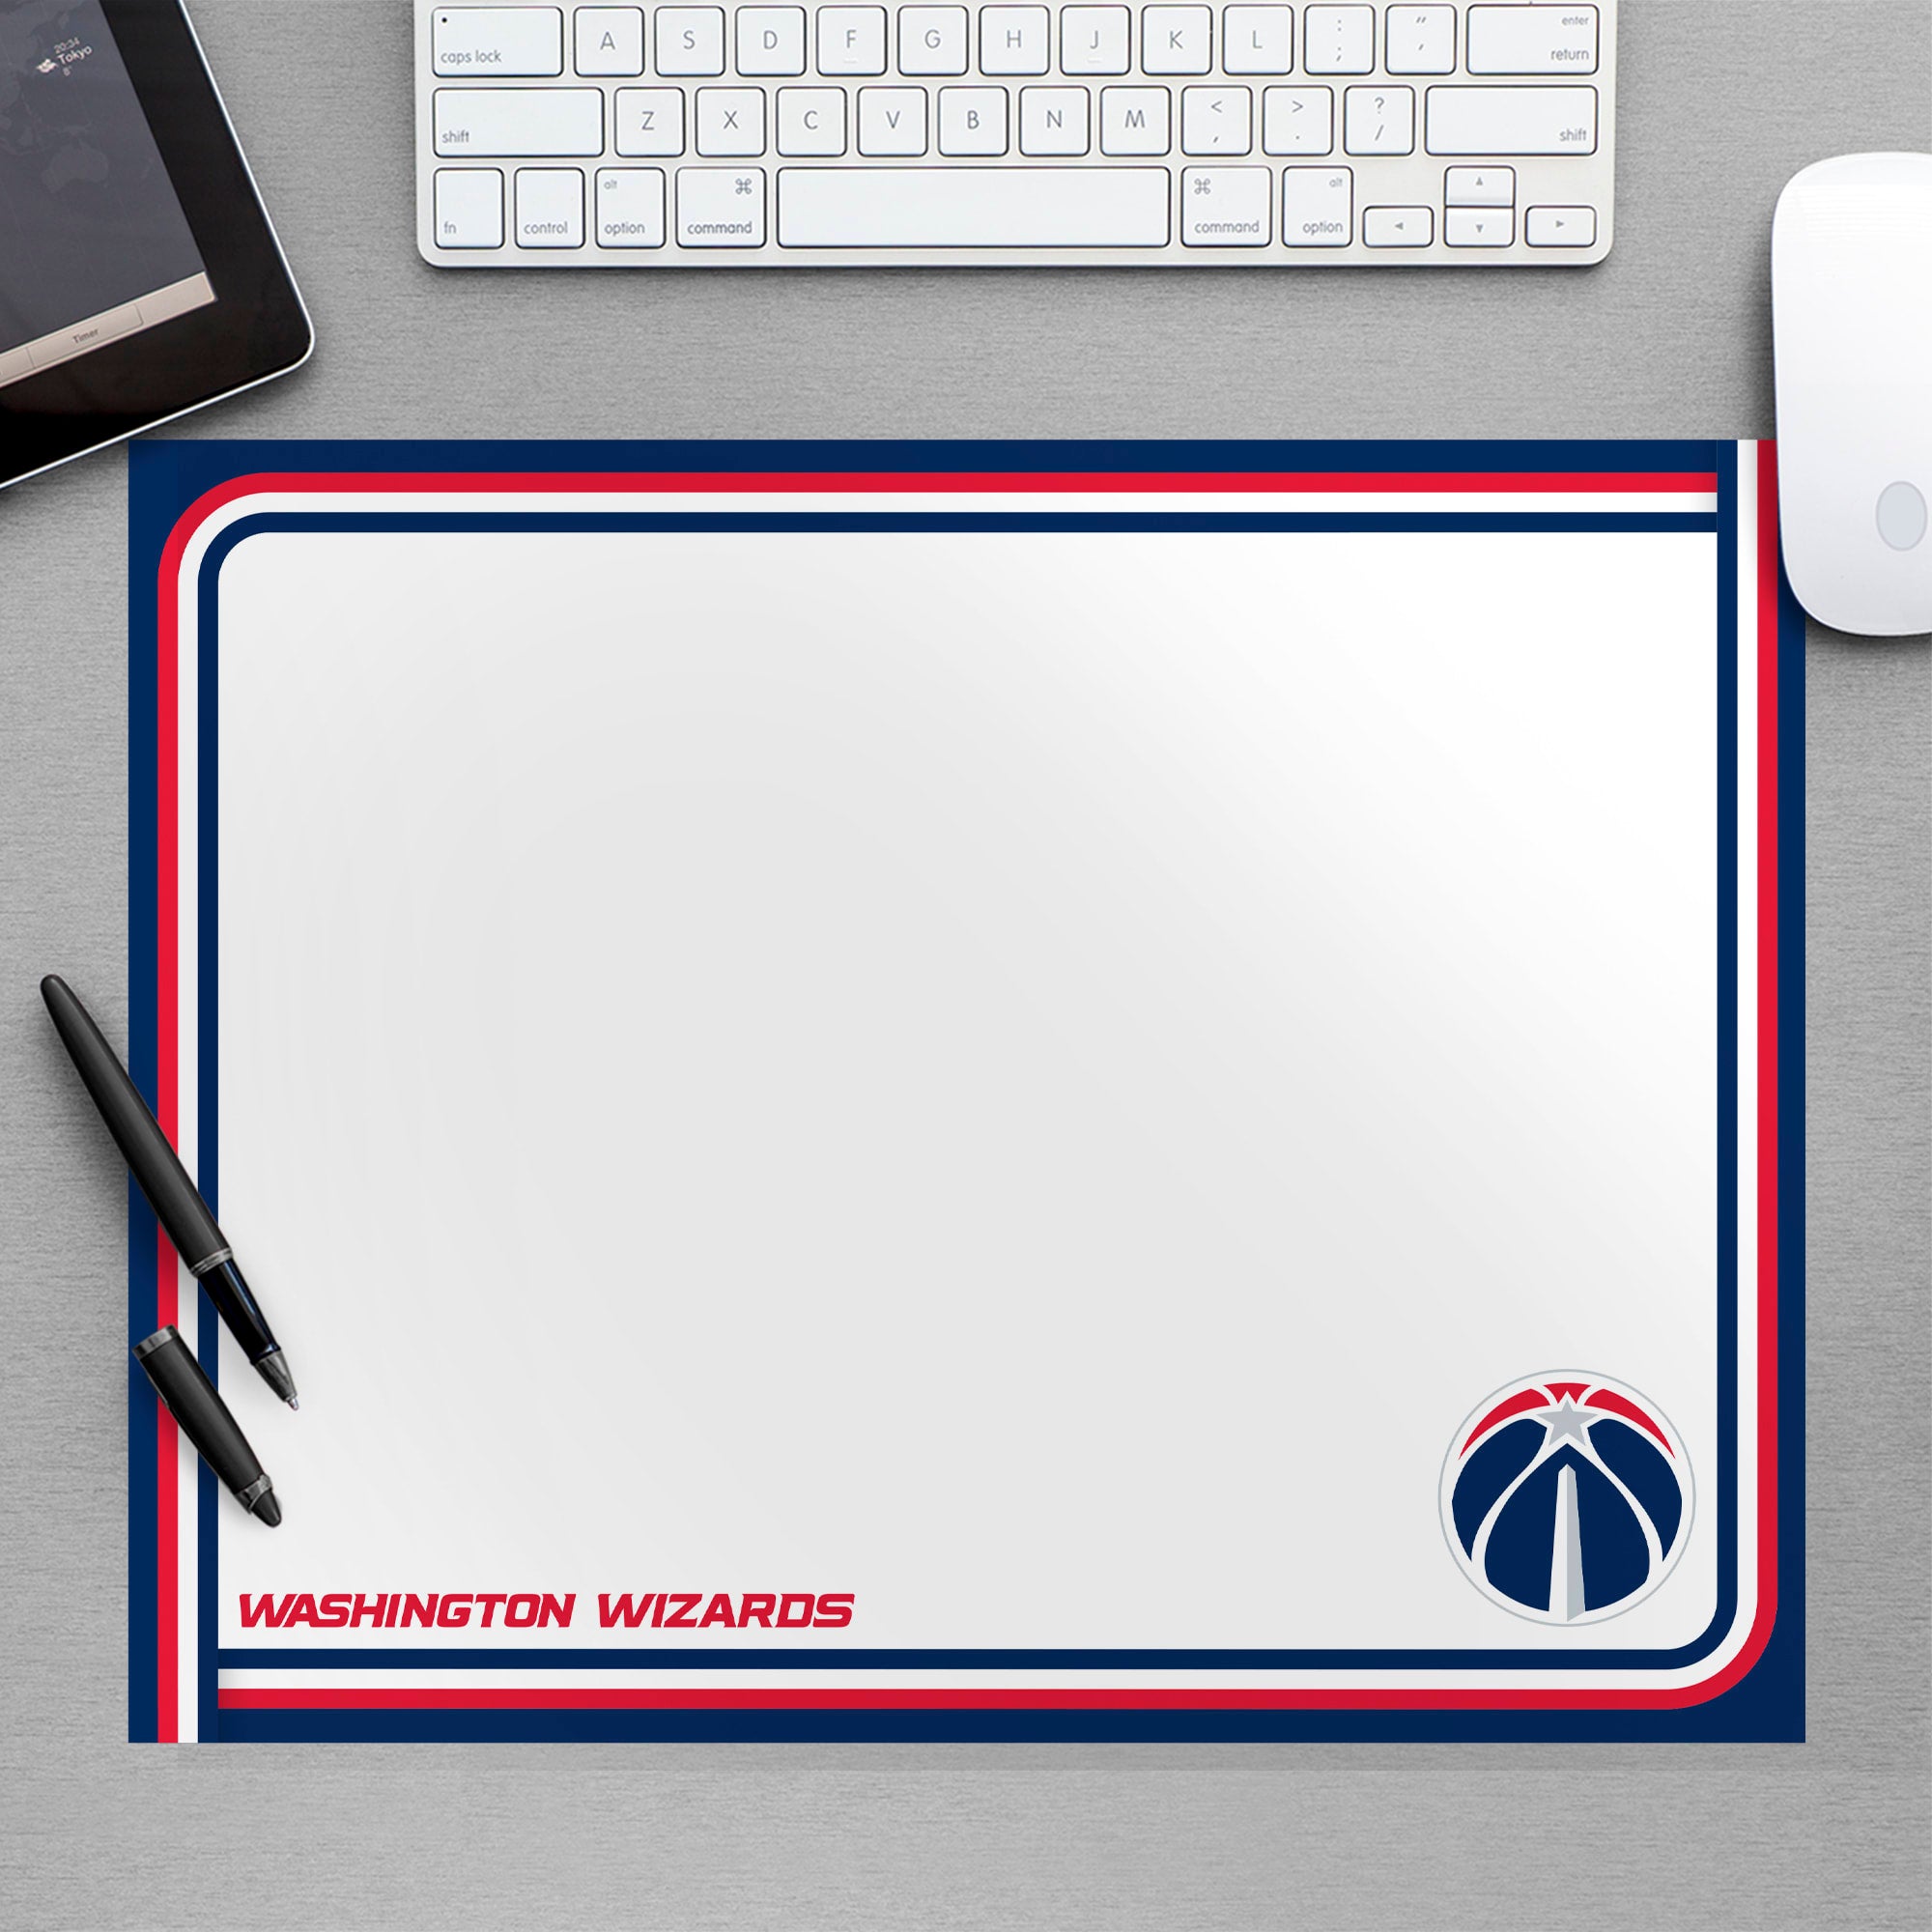 Washington Wizards for Washington Wizard: Dry Erase Whiteboard - Officially Licensed NBA Removable Wall Decal Large by Fathead |